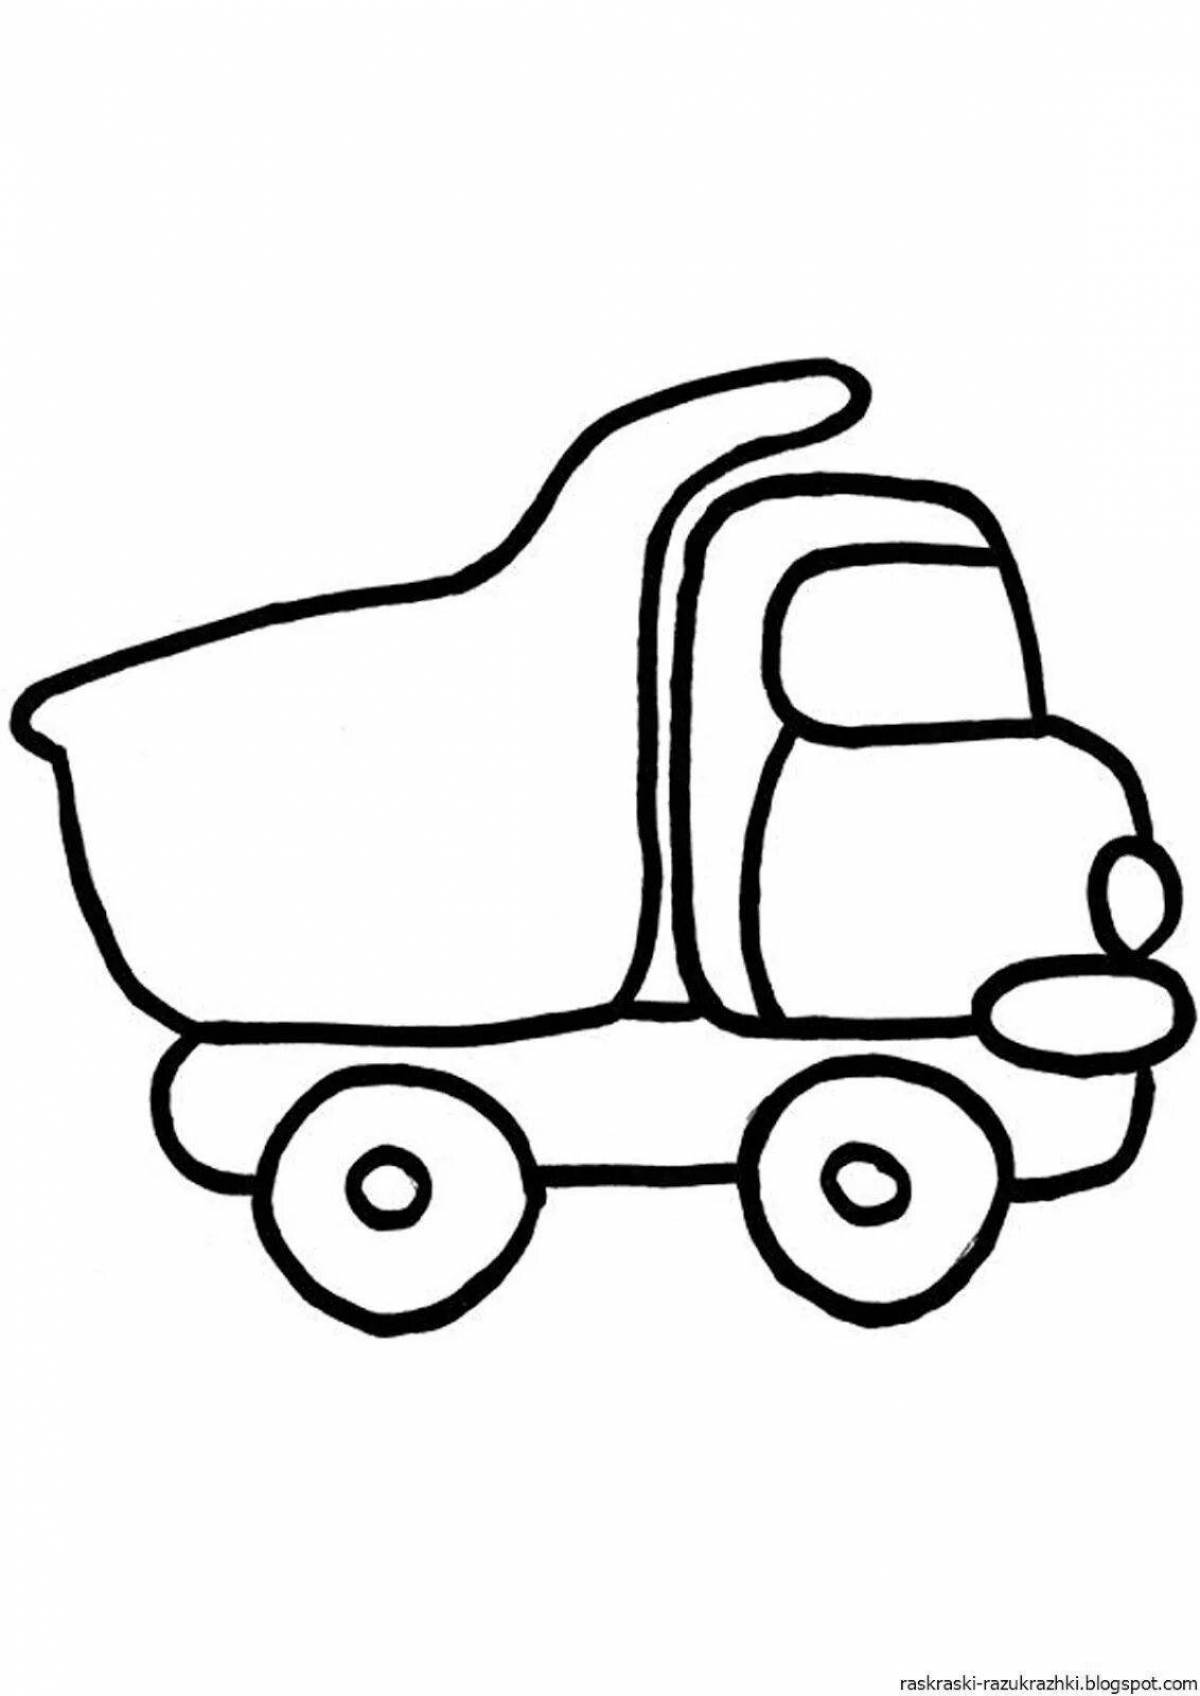 Colored coloring pages of big cars for children 3-4 years old